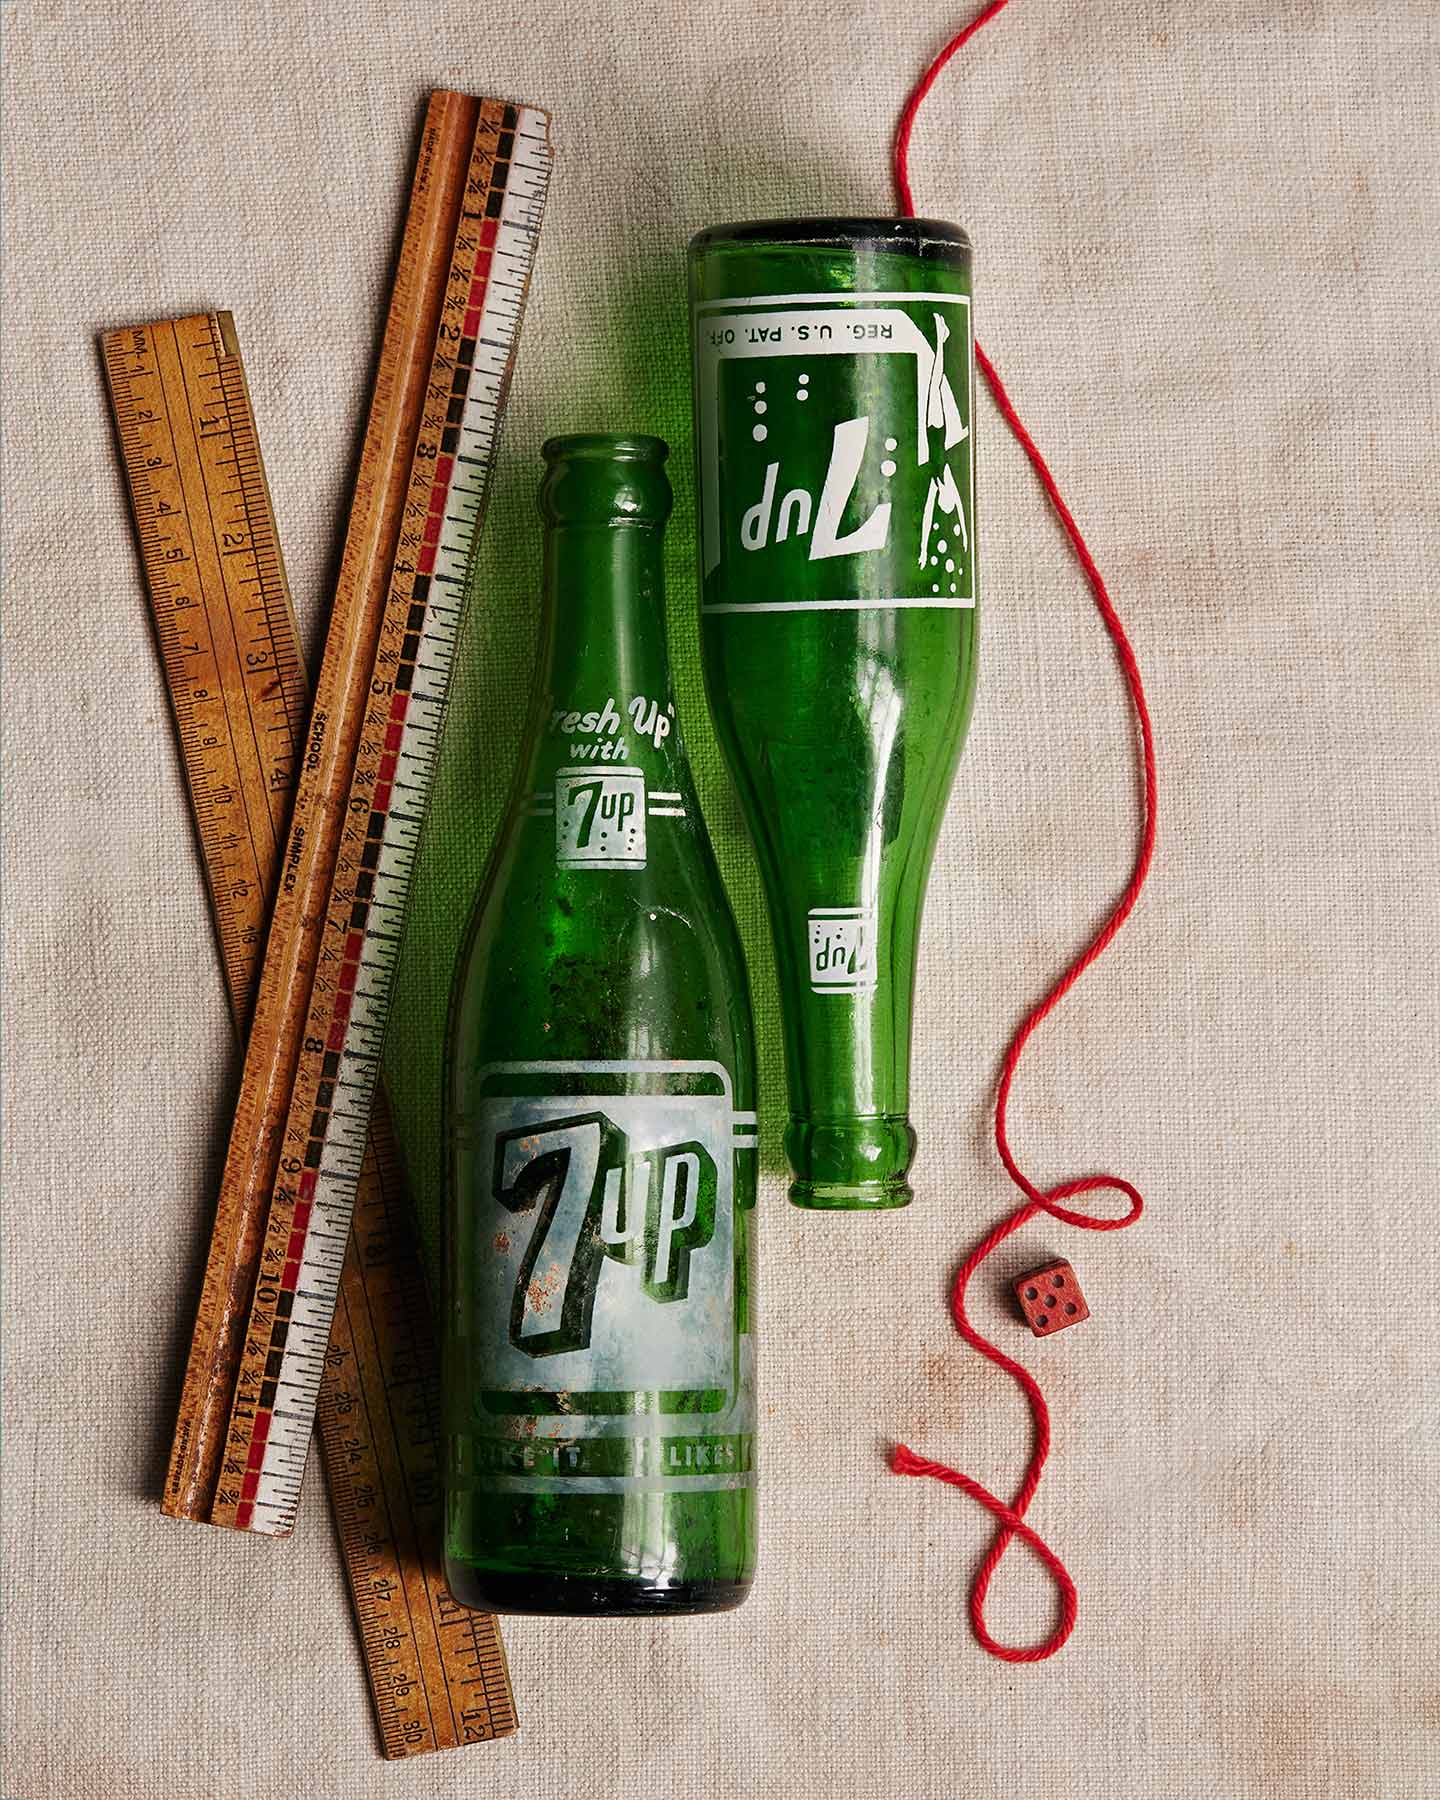 two old 7up bottles arranged in a still life photograph